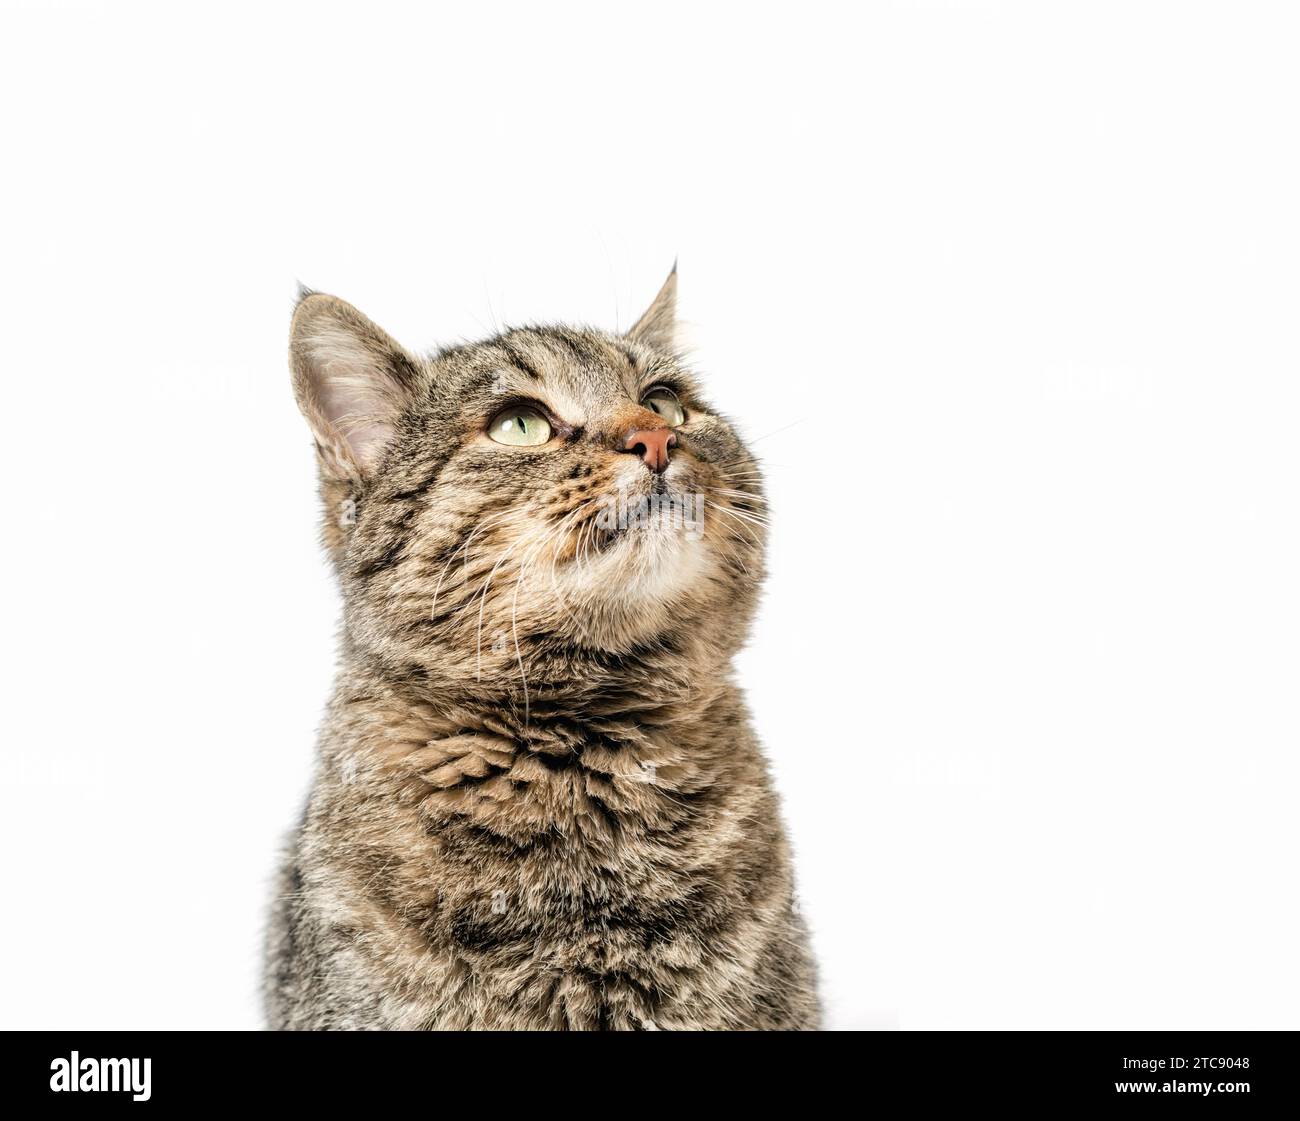 Gray cat looks up portrait on a white background isolated Stock Photo